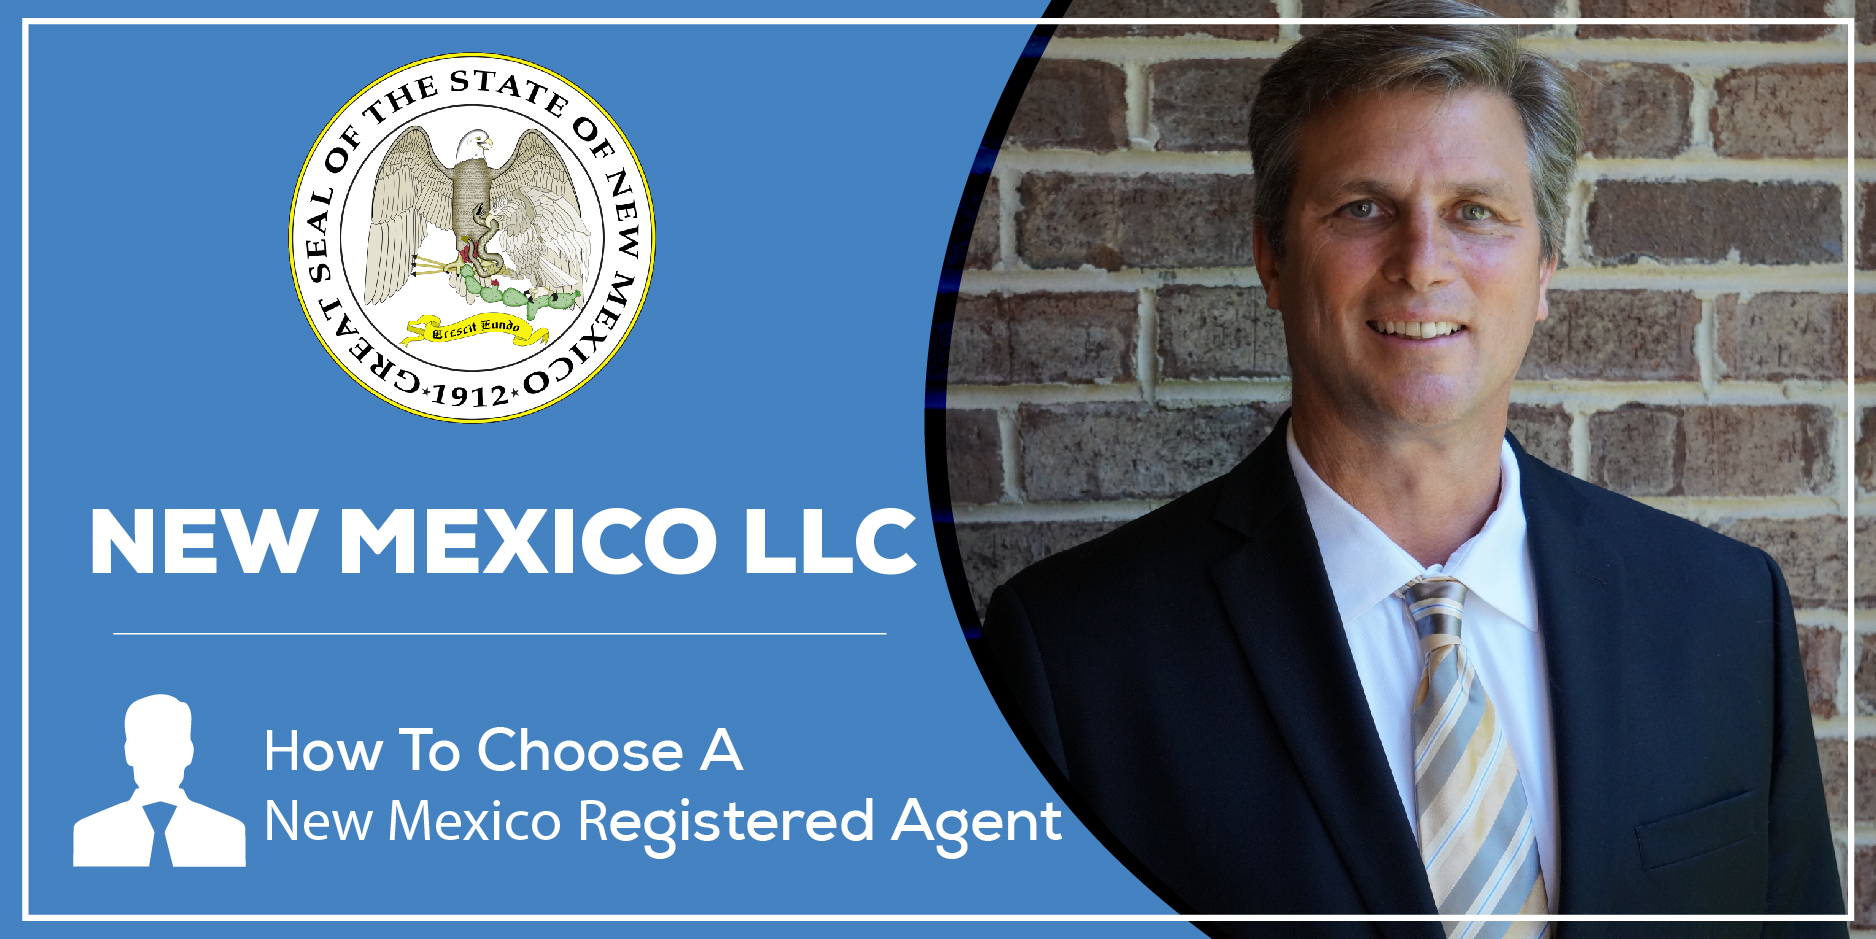 New Mexico Registered Agent